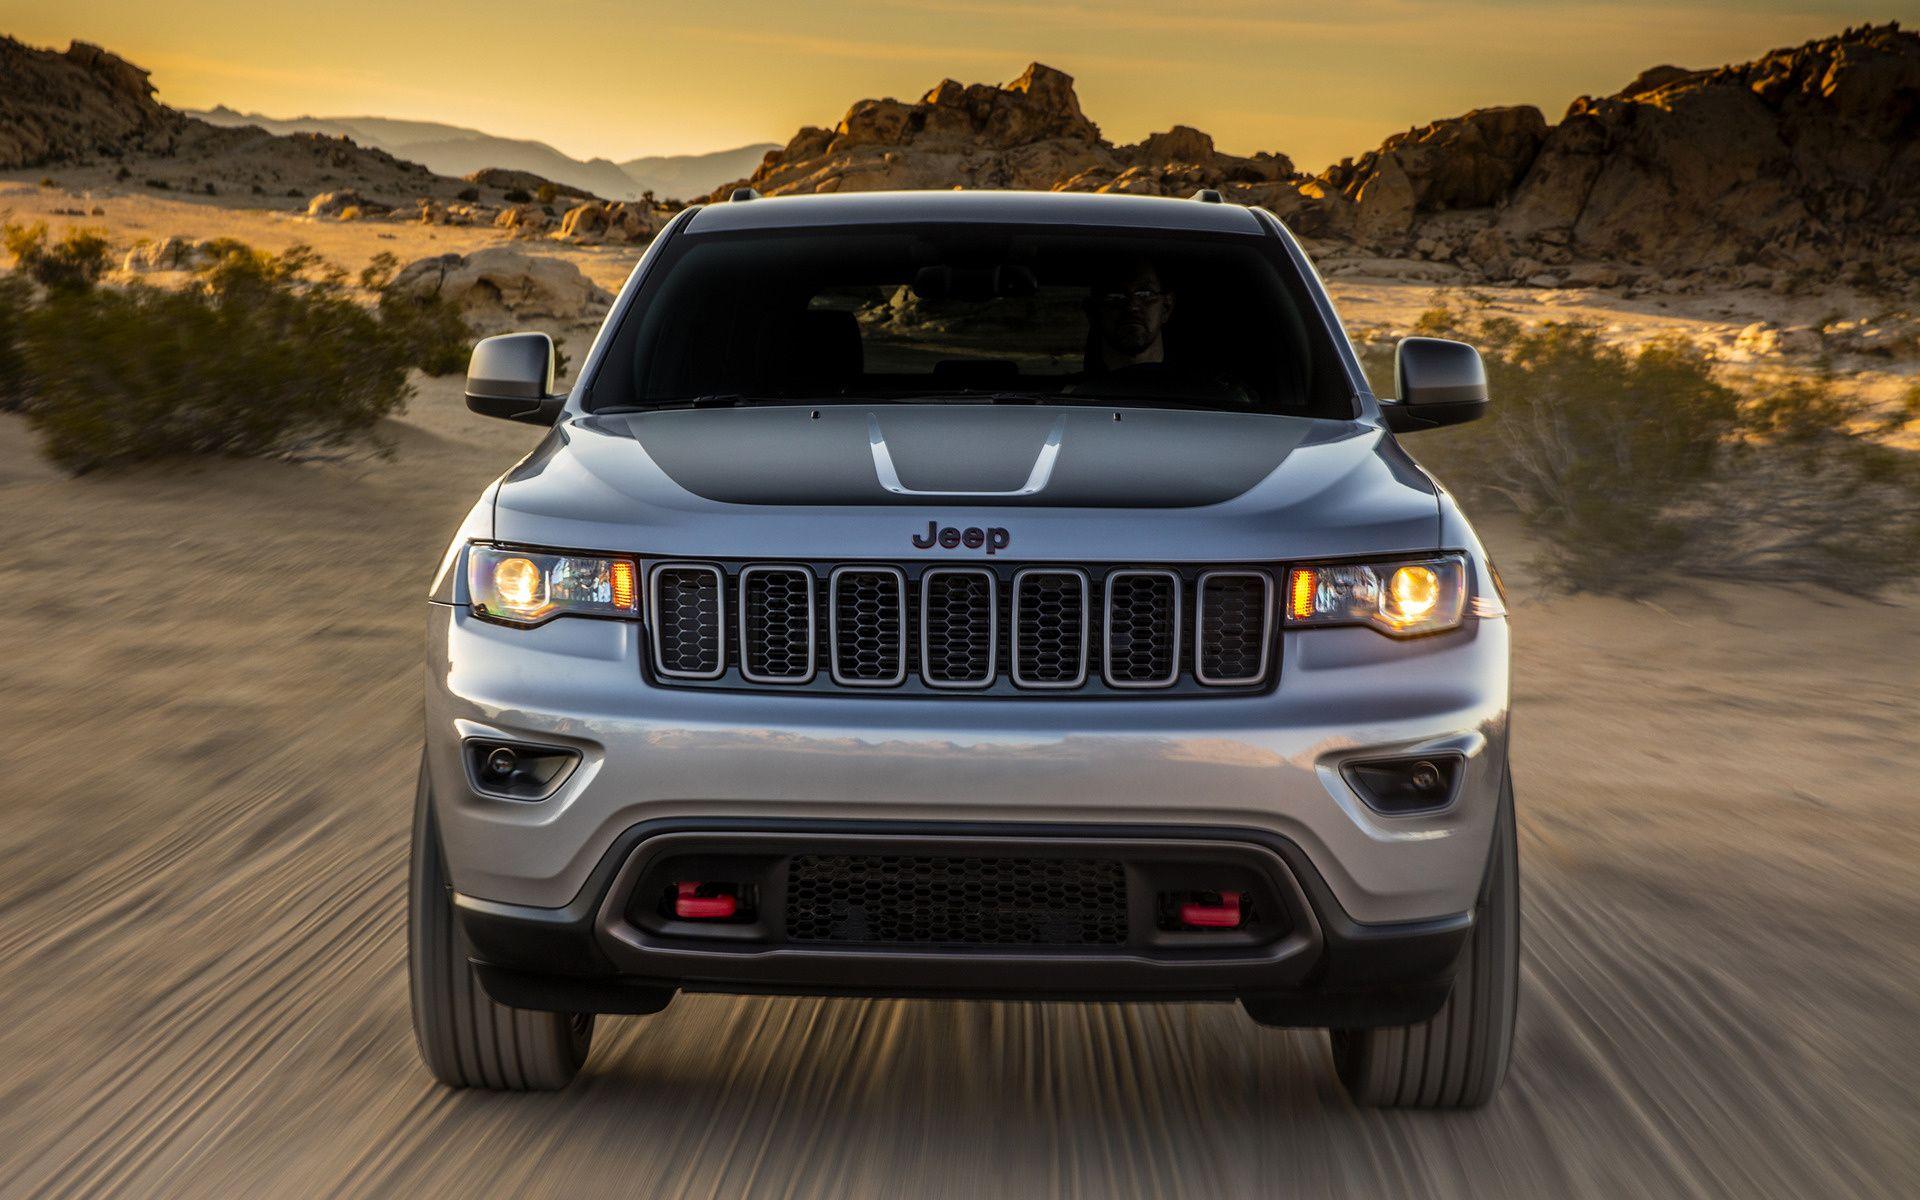 Jeep Grand Cherokee Trailhawk (2017) Wallpaper and HD Image